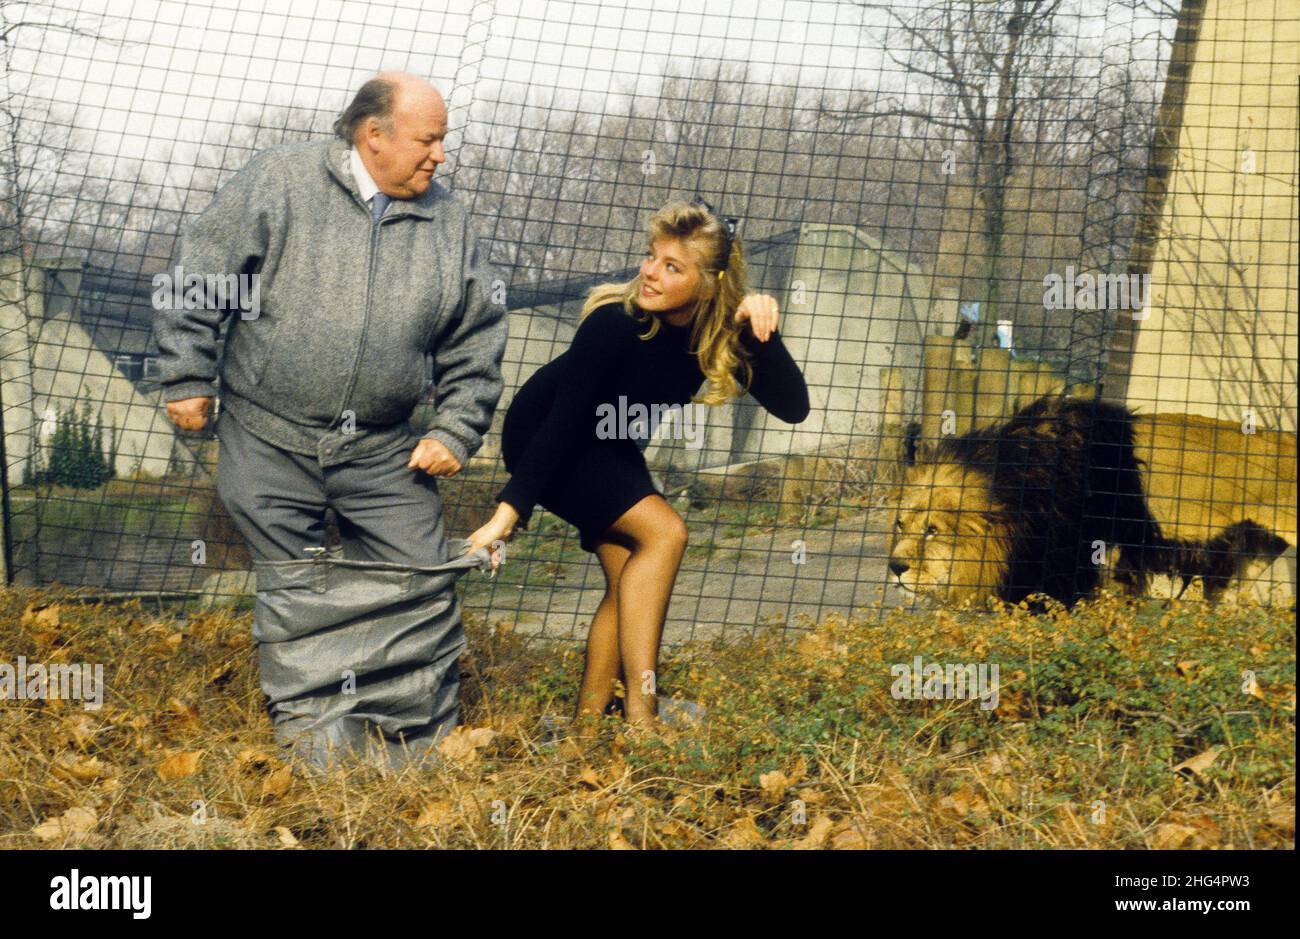 Comedian Roy Kinnear with page three model Suzanne Mizzi at London Zoo in Regents Park, watched by caged feline Dax. Stock Photo